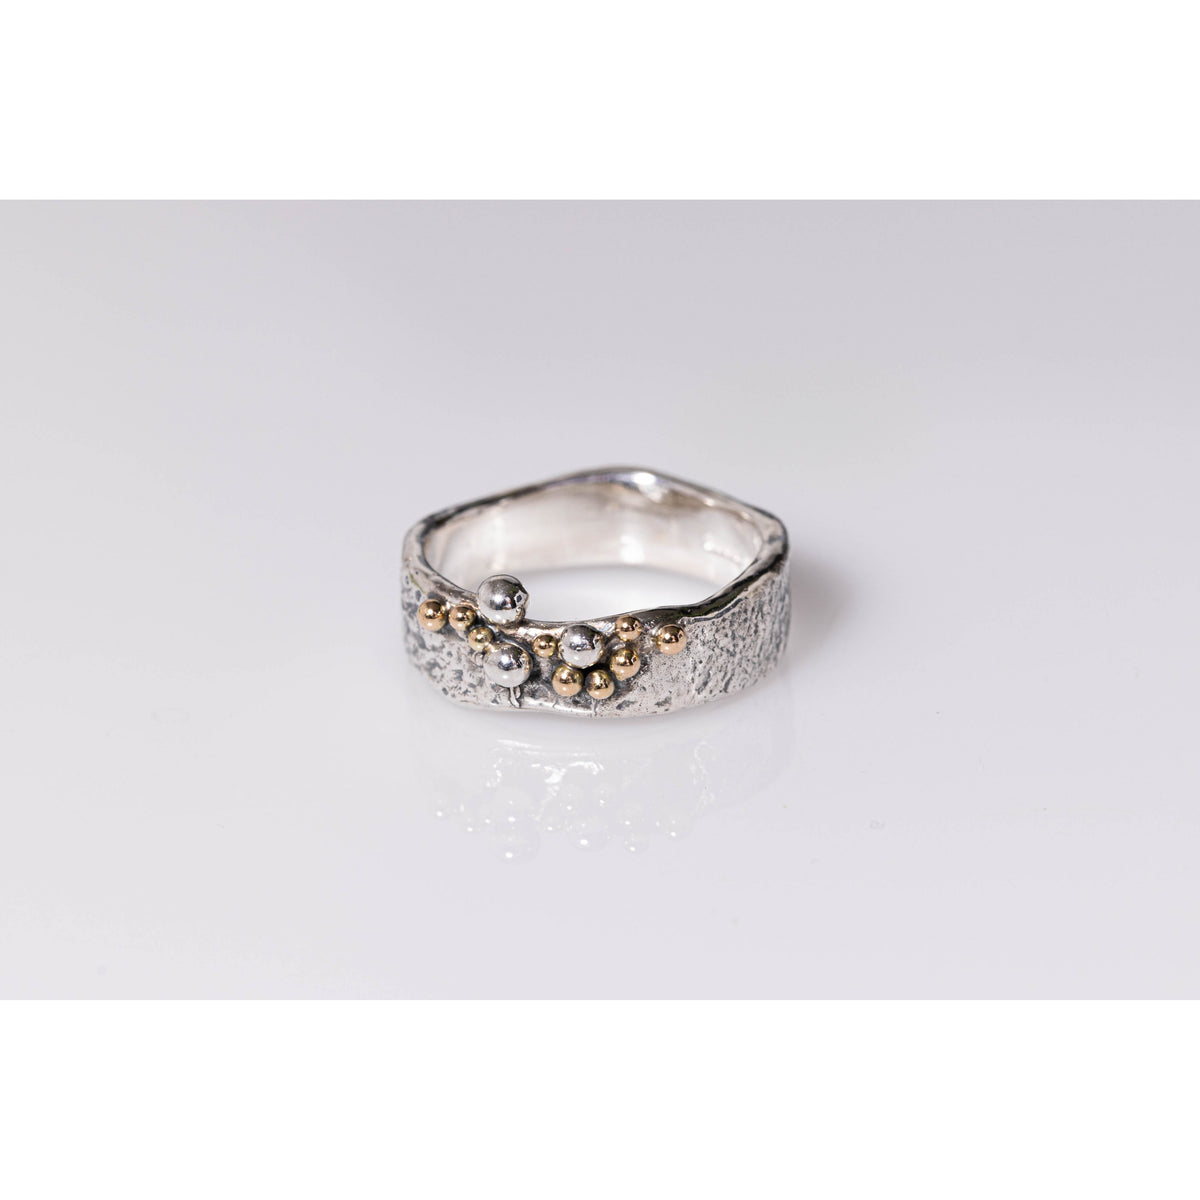 &#39;SA R14 Organic Silver Ring&#39; by Sandra Austin jewellery, available at Padstow Gallery, Cornwall